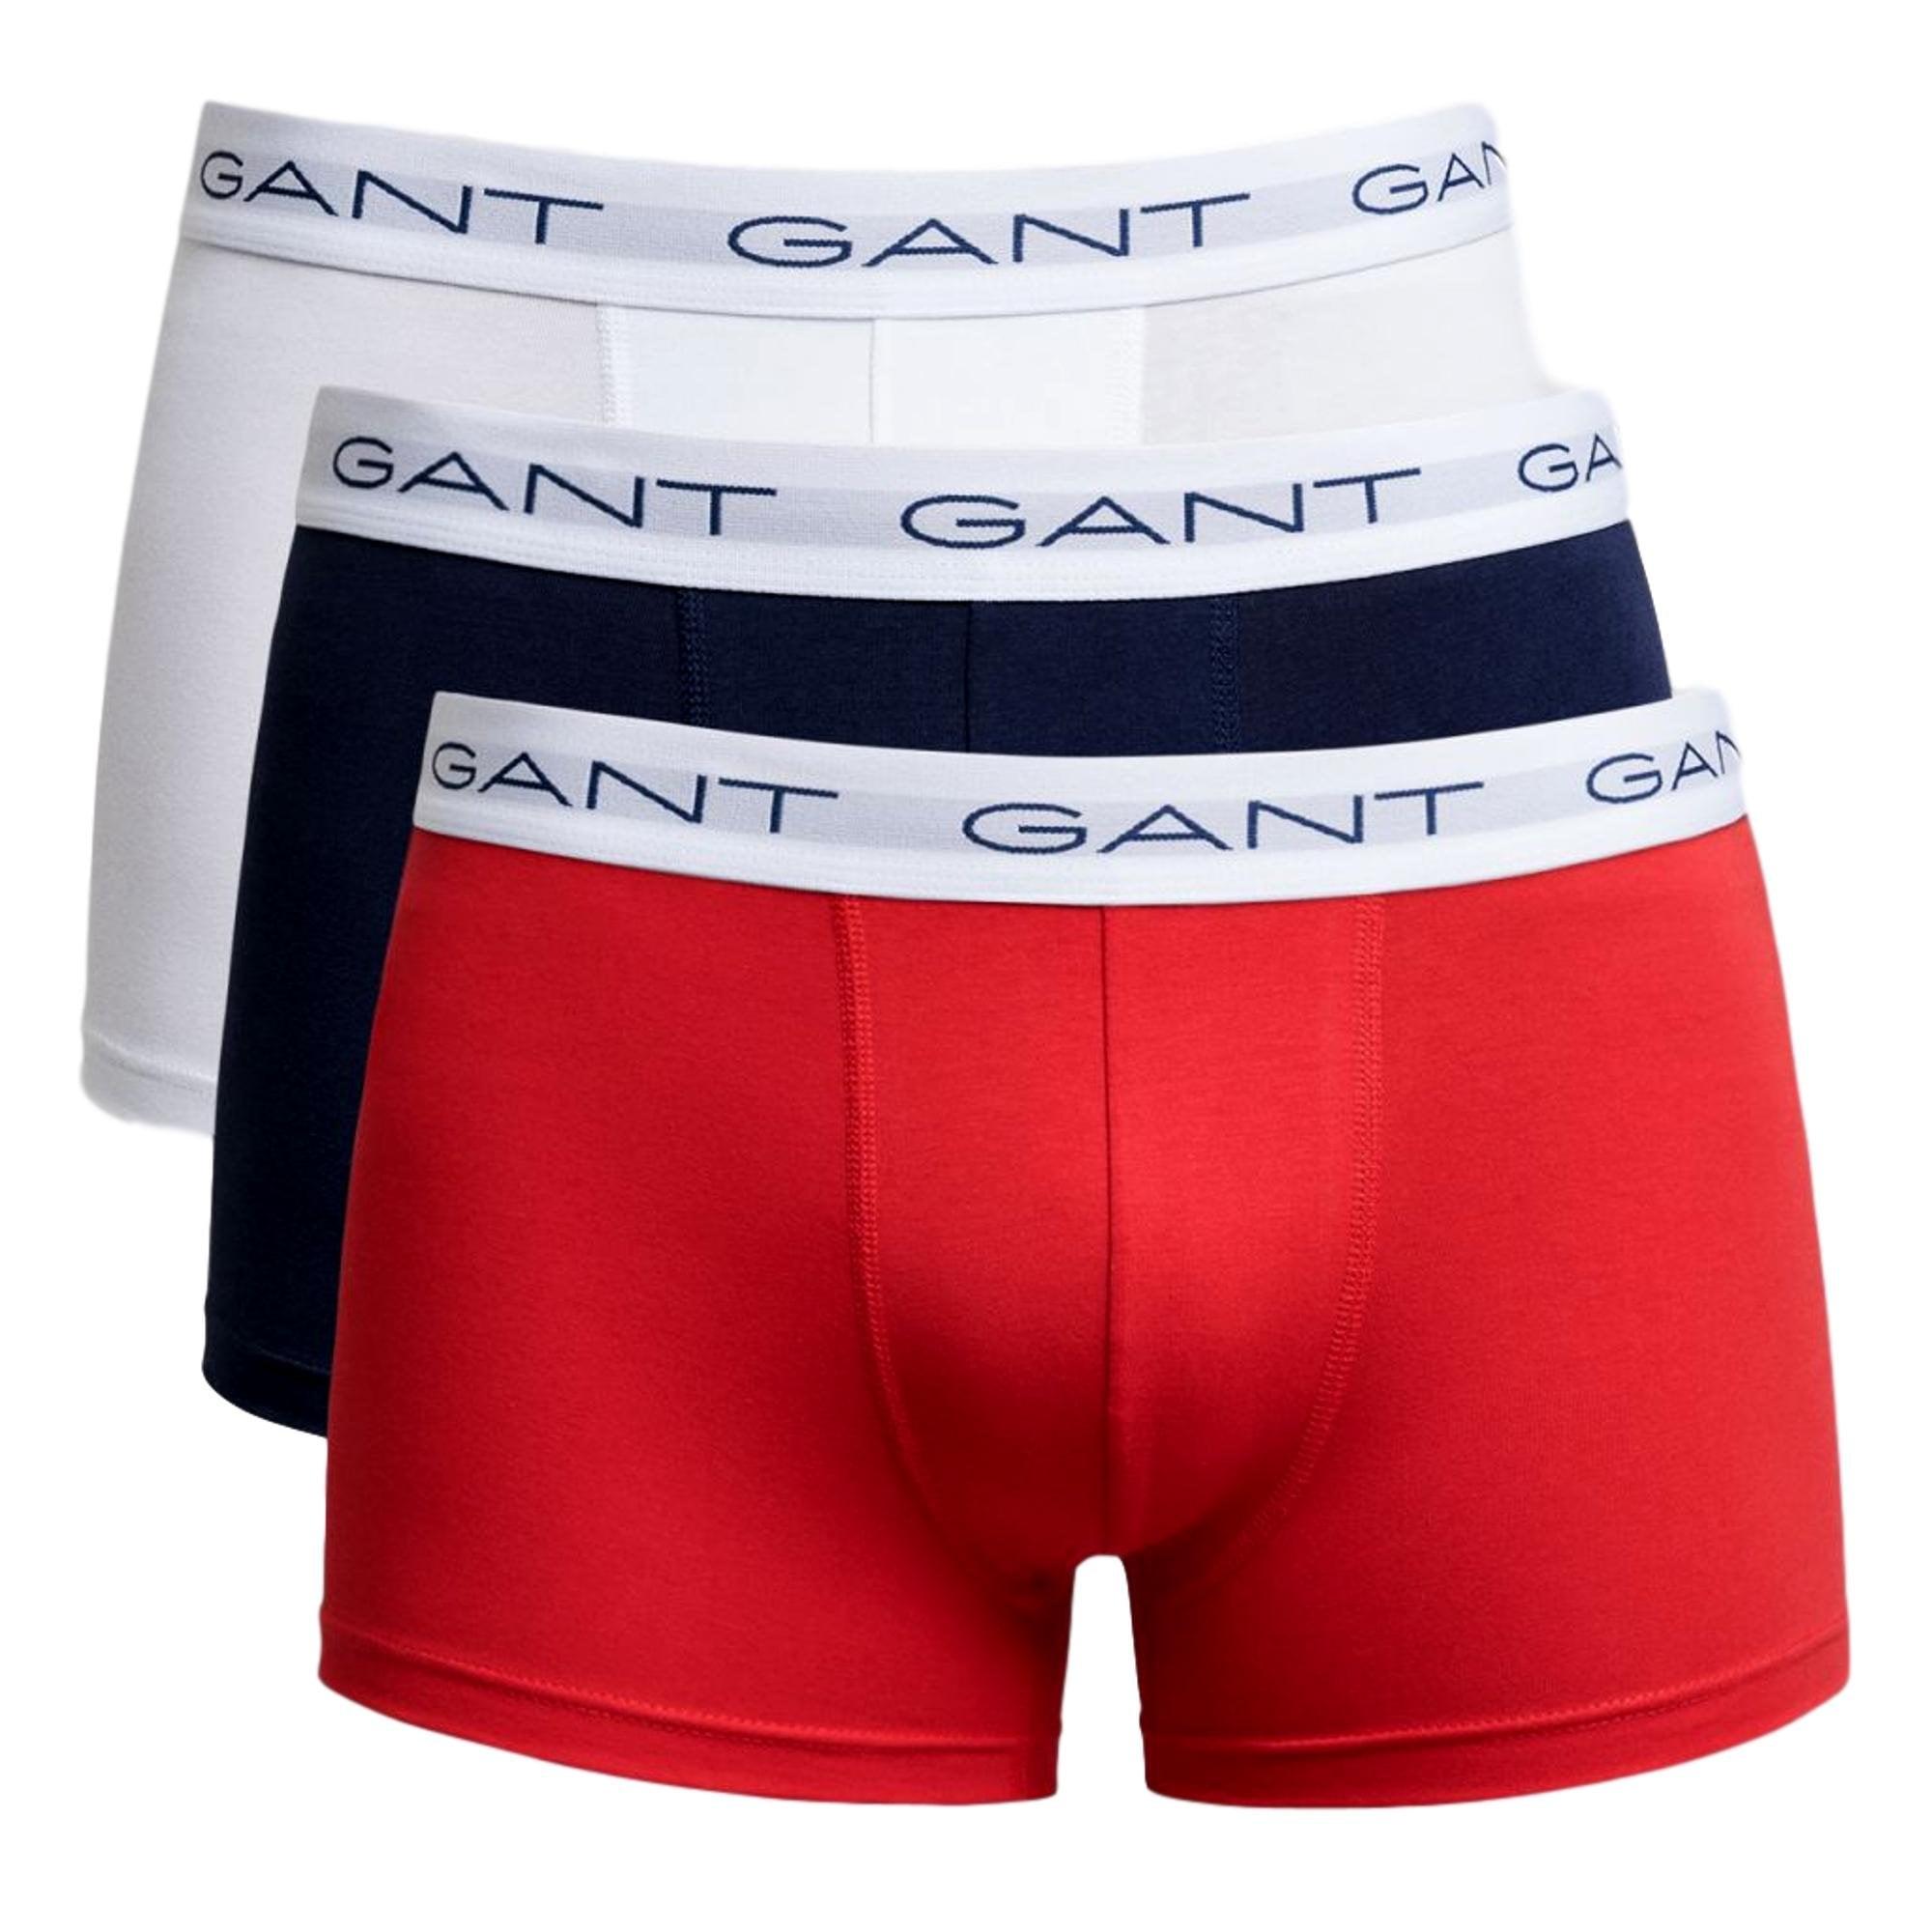 3 pack of full knickers in red, navy & white Cotton Stretch